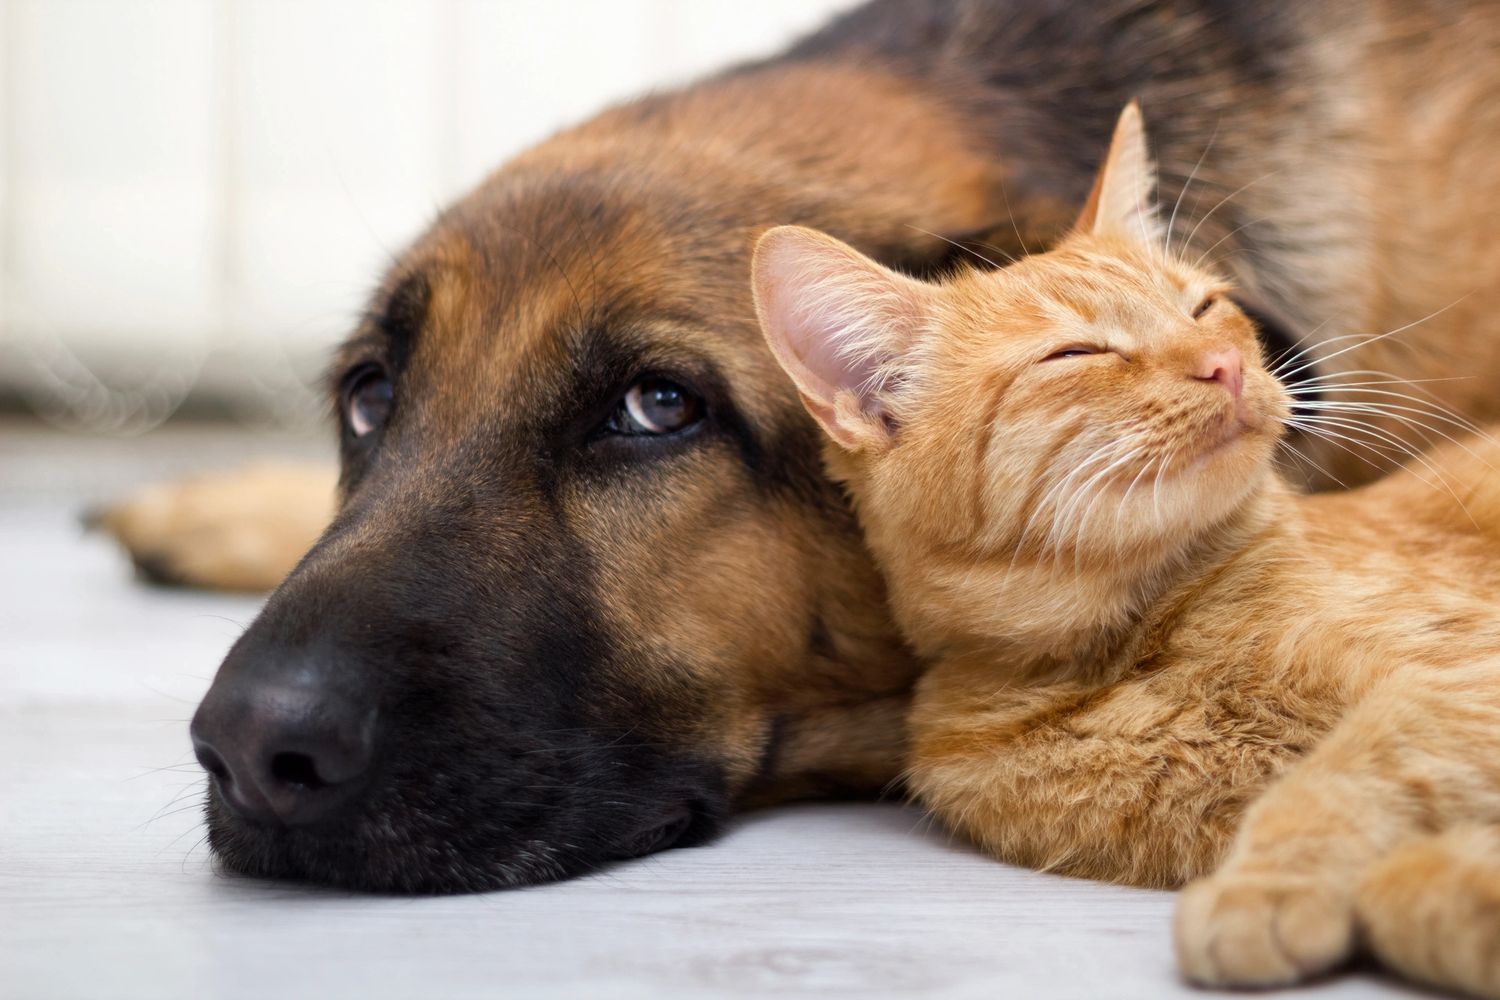 Black and tan shepherd dog and orange short haired tabby cat